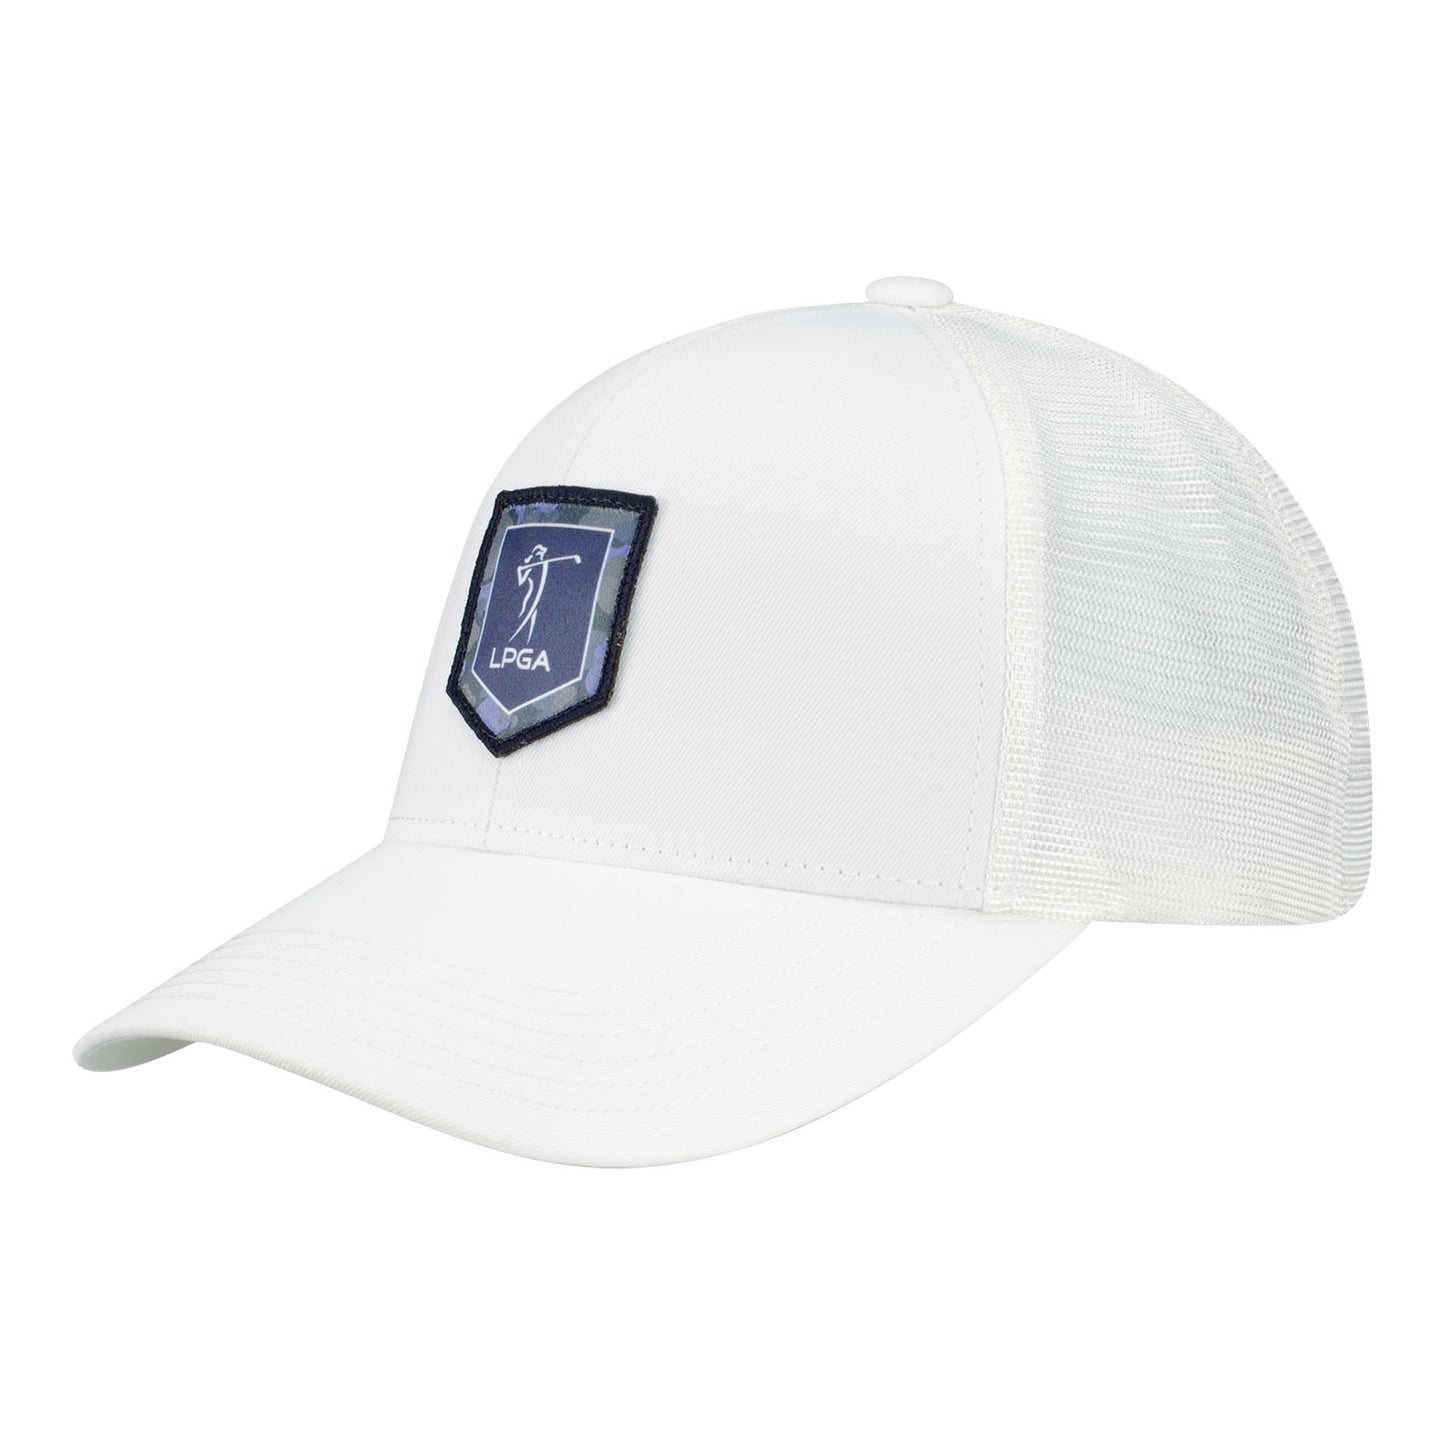 Imperial 2023 LPGA Men's Mesh Back Hat with Satin Edged Patch in White - Angled Left Side View